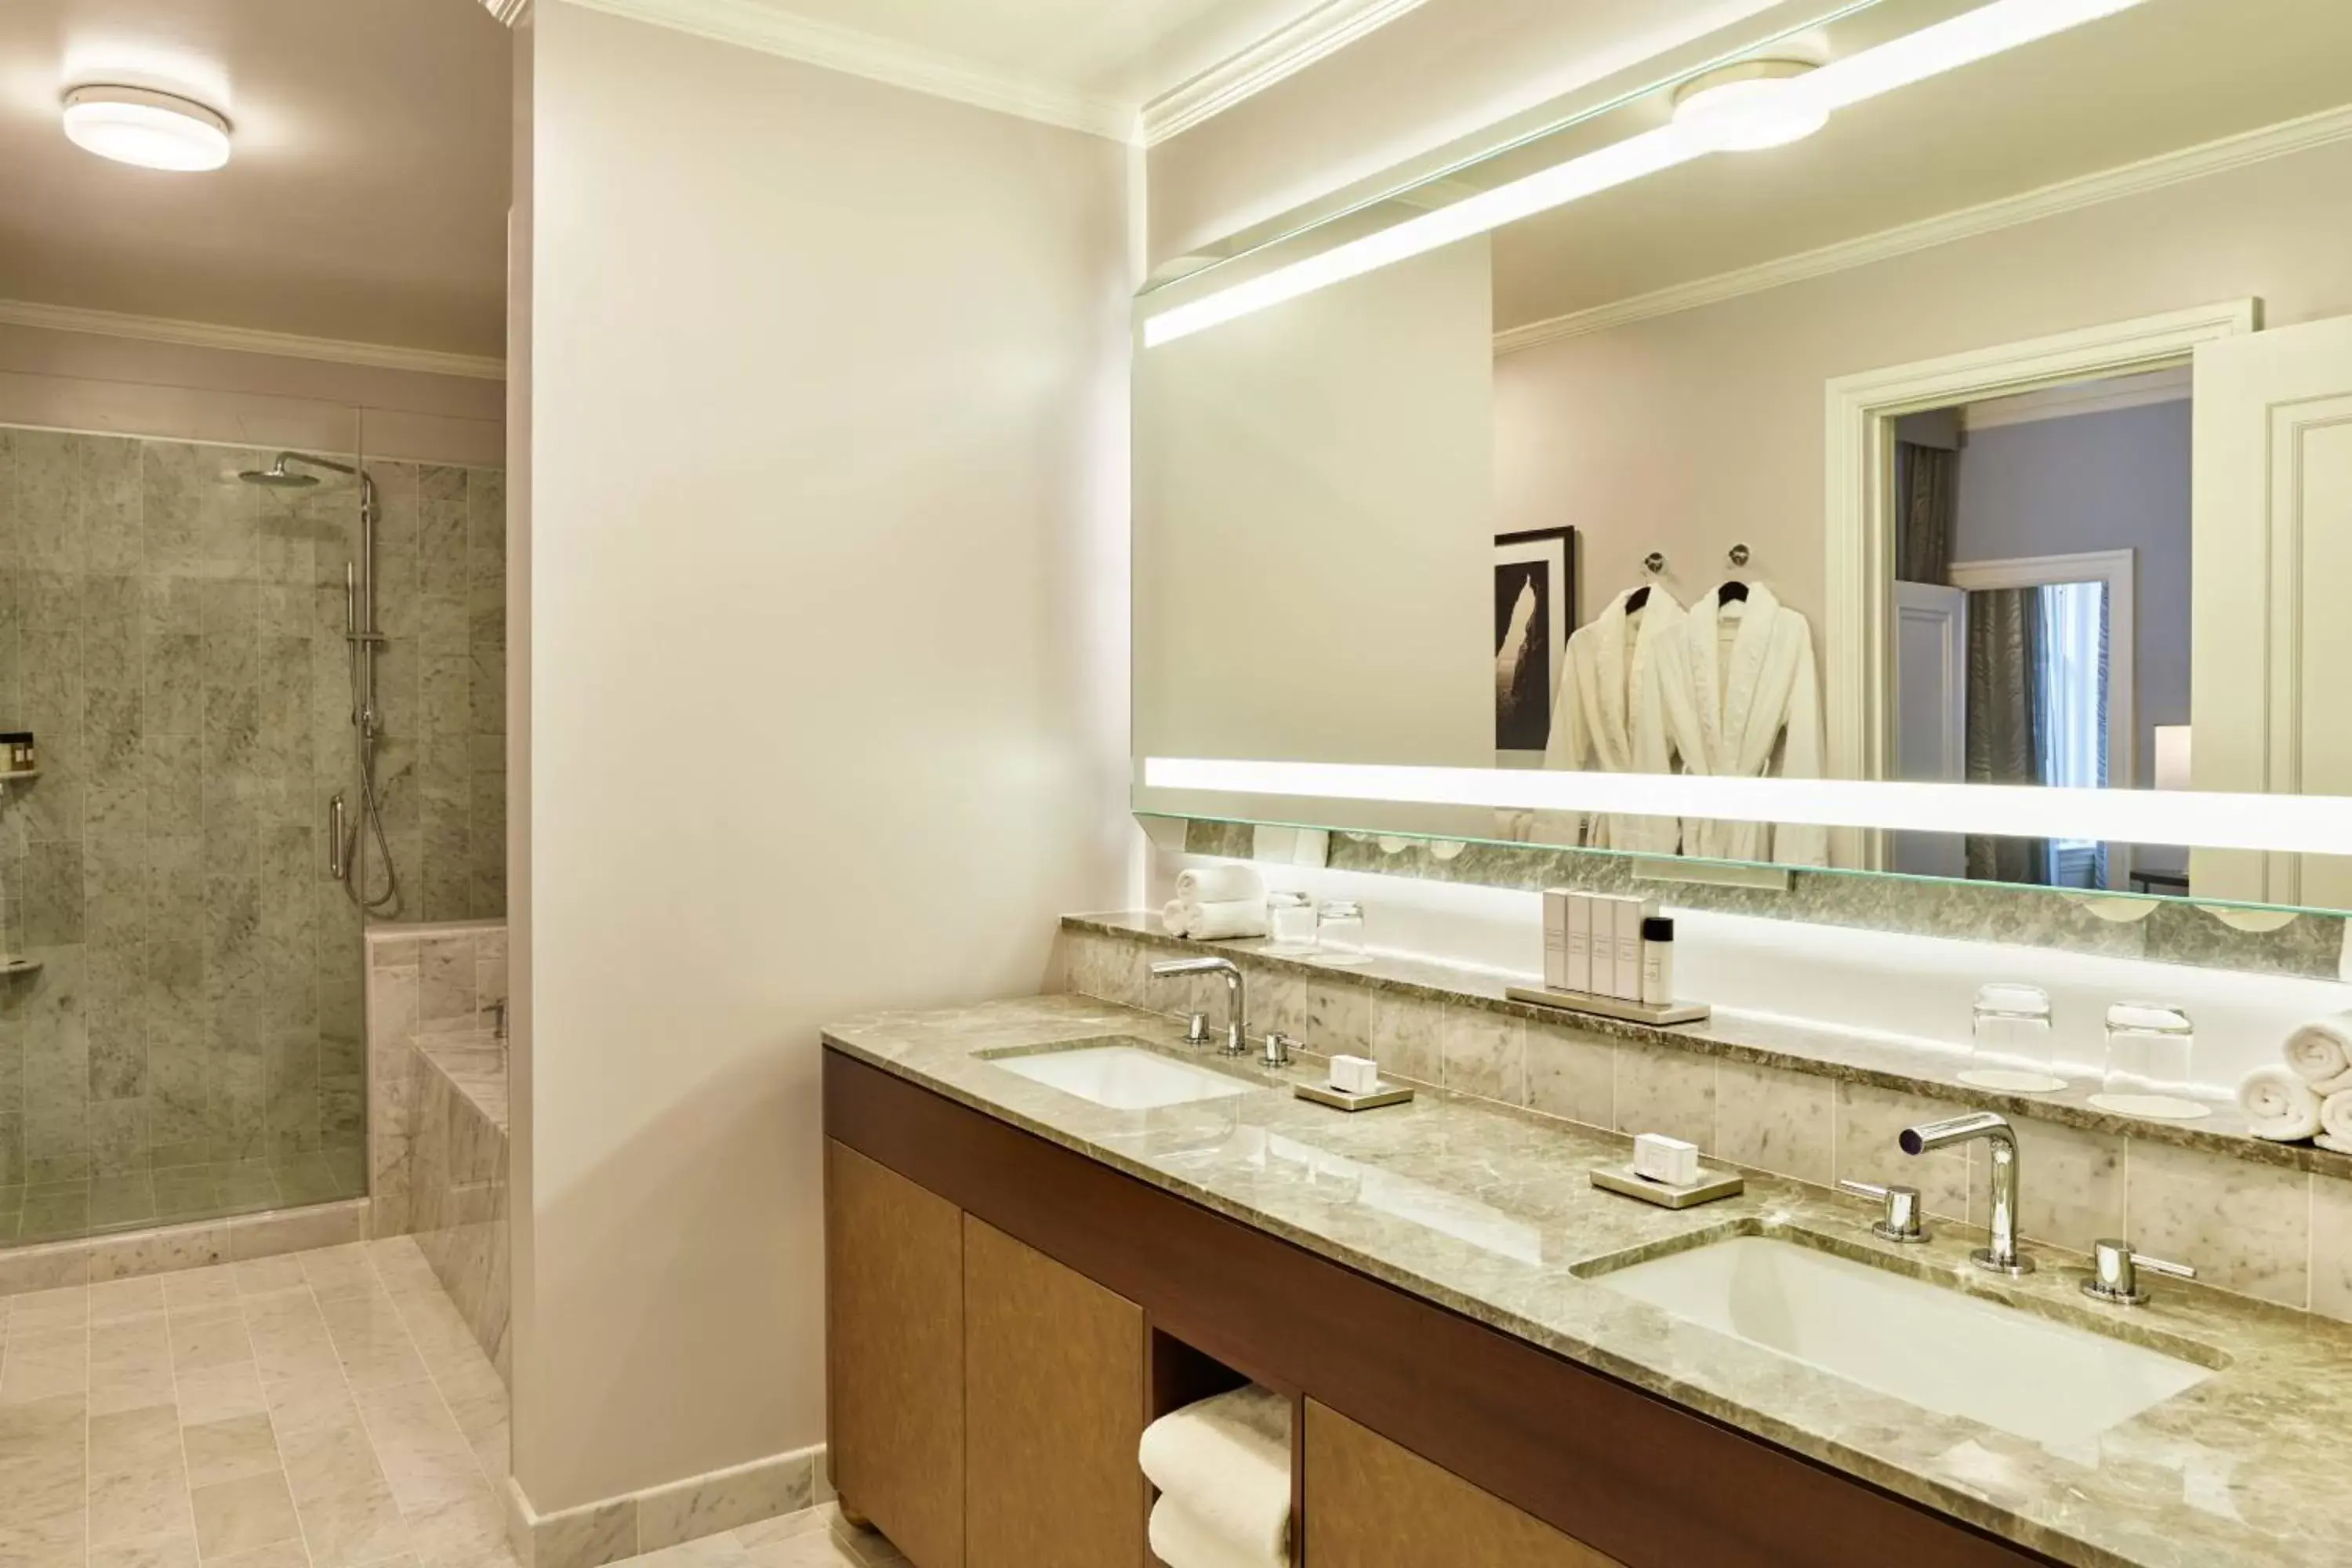 Bathroom in Palace Hotel, a Luxury Collection Hotel, San Francisco